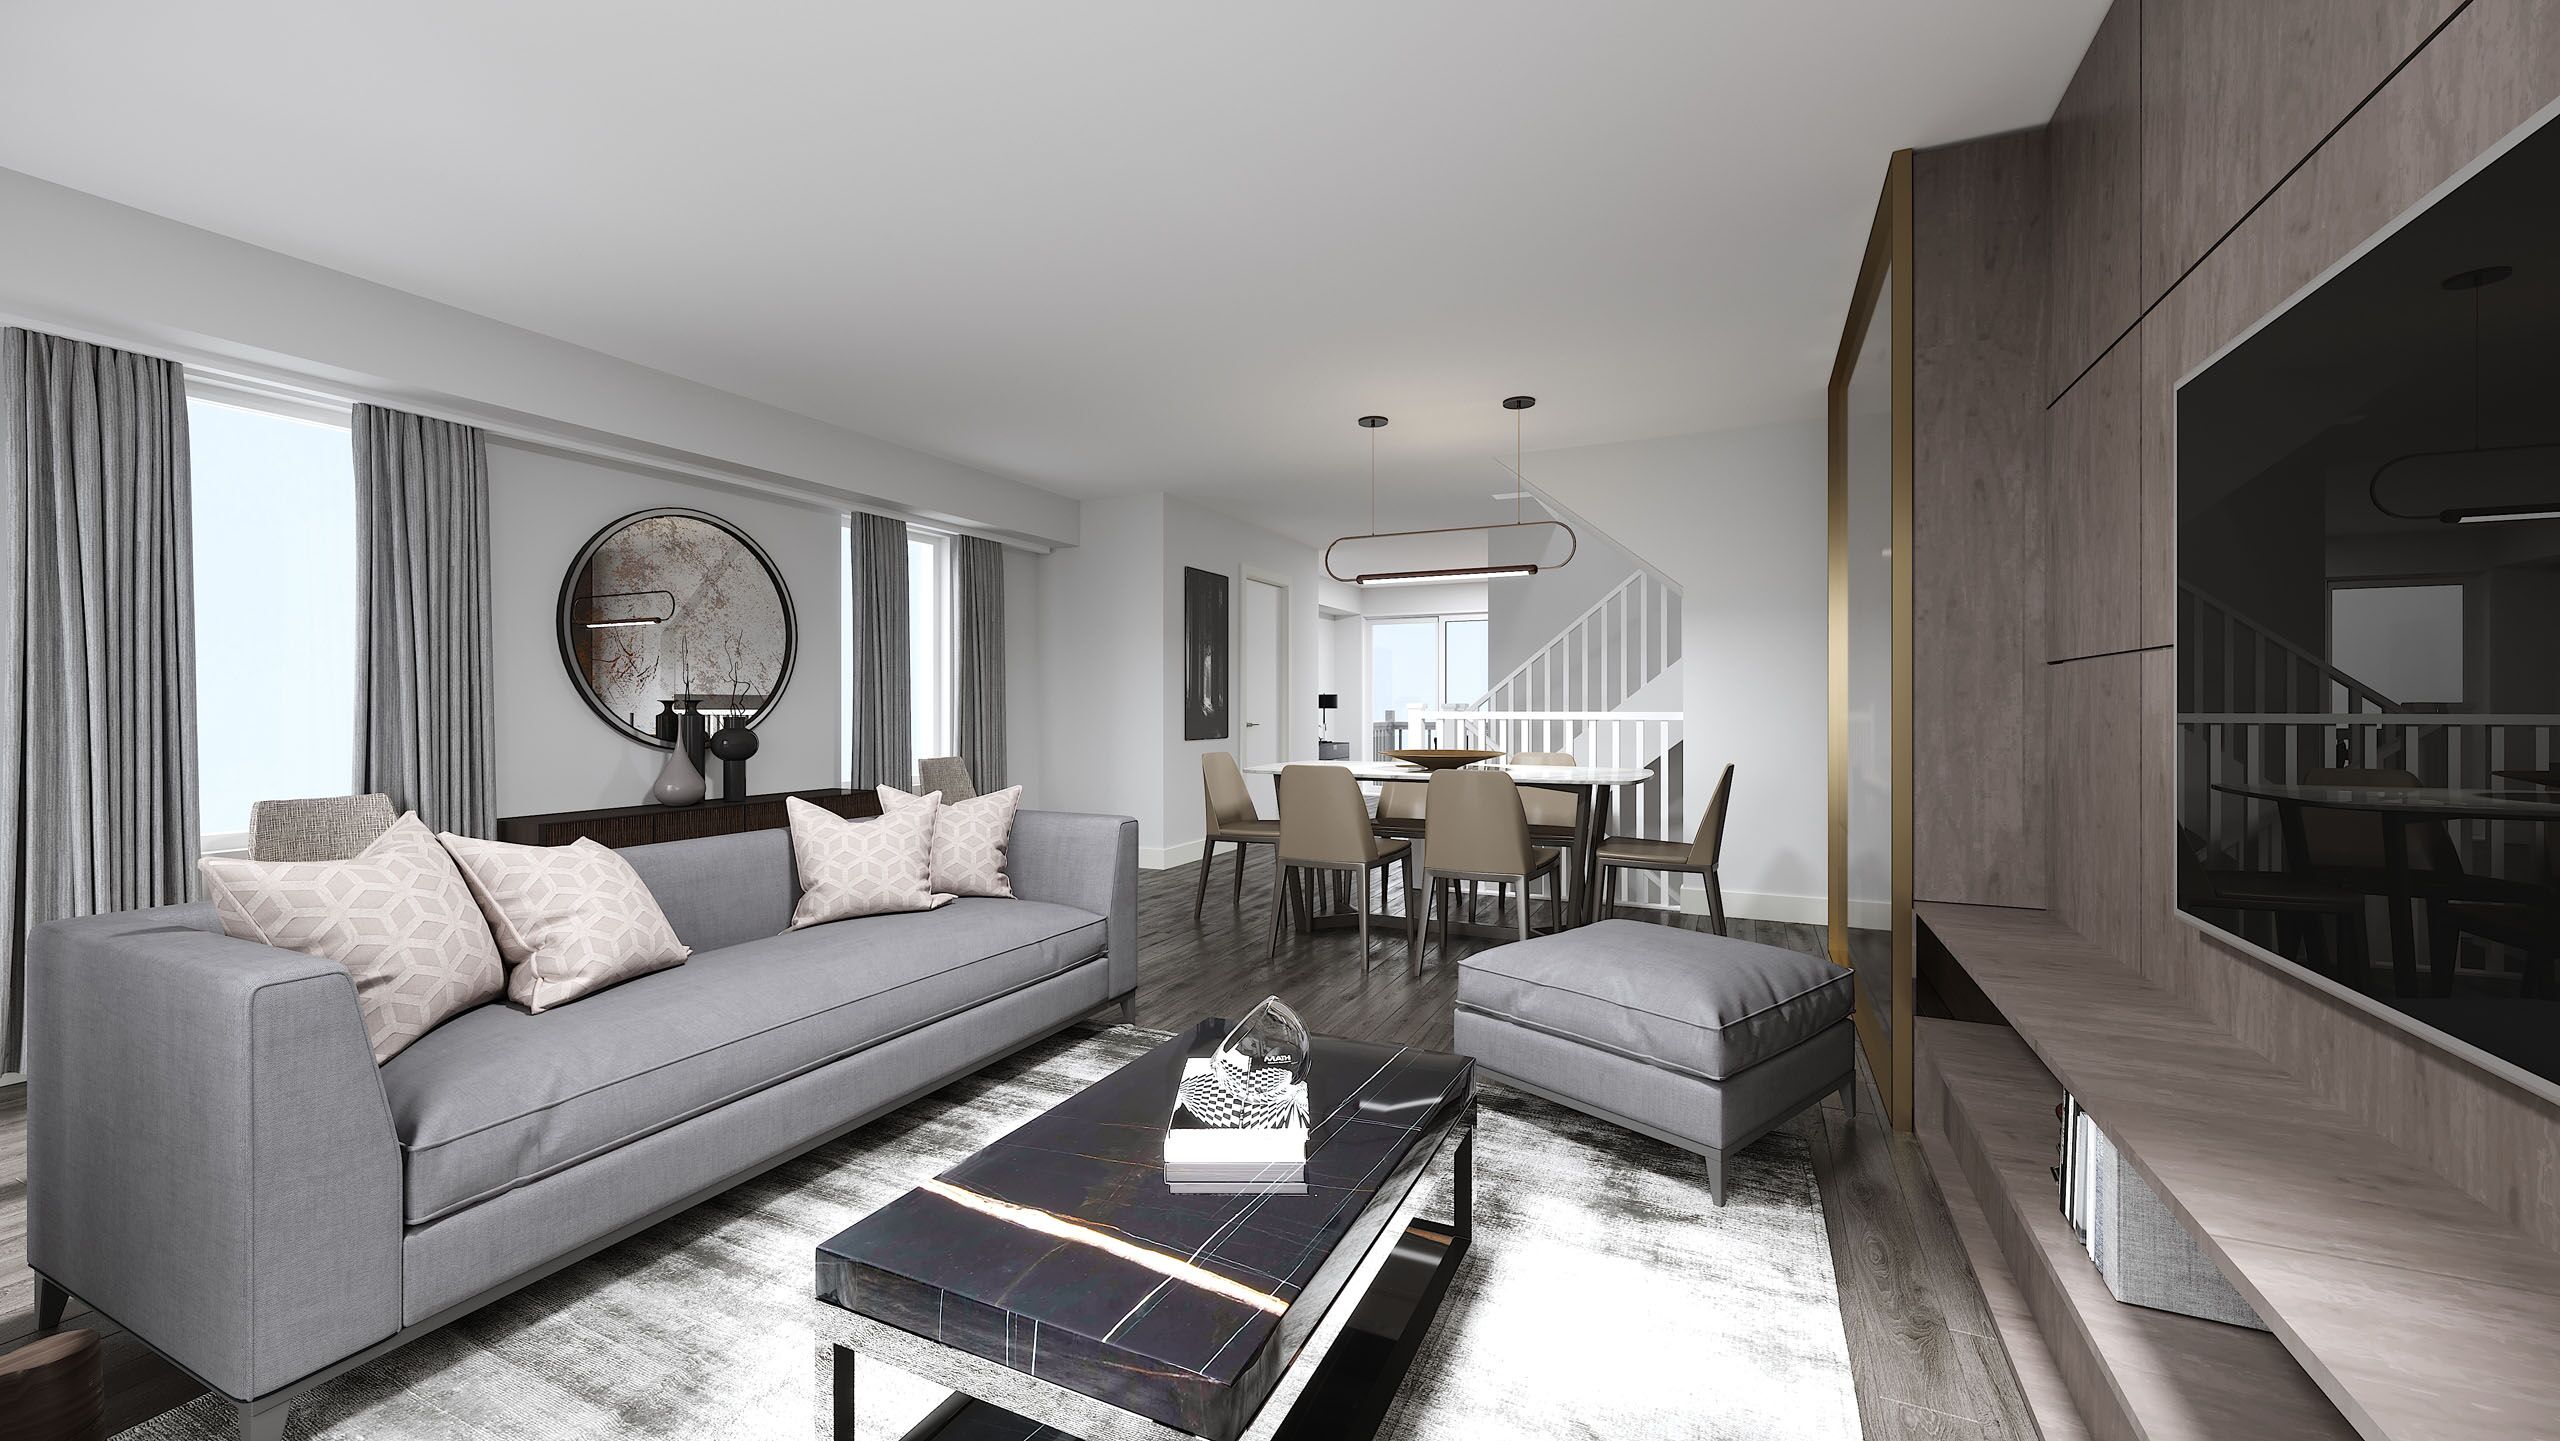 Interior Rendering - Living Room of a Studio- Evermore by Tridel